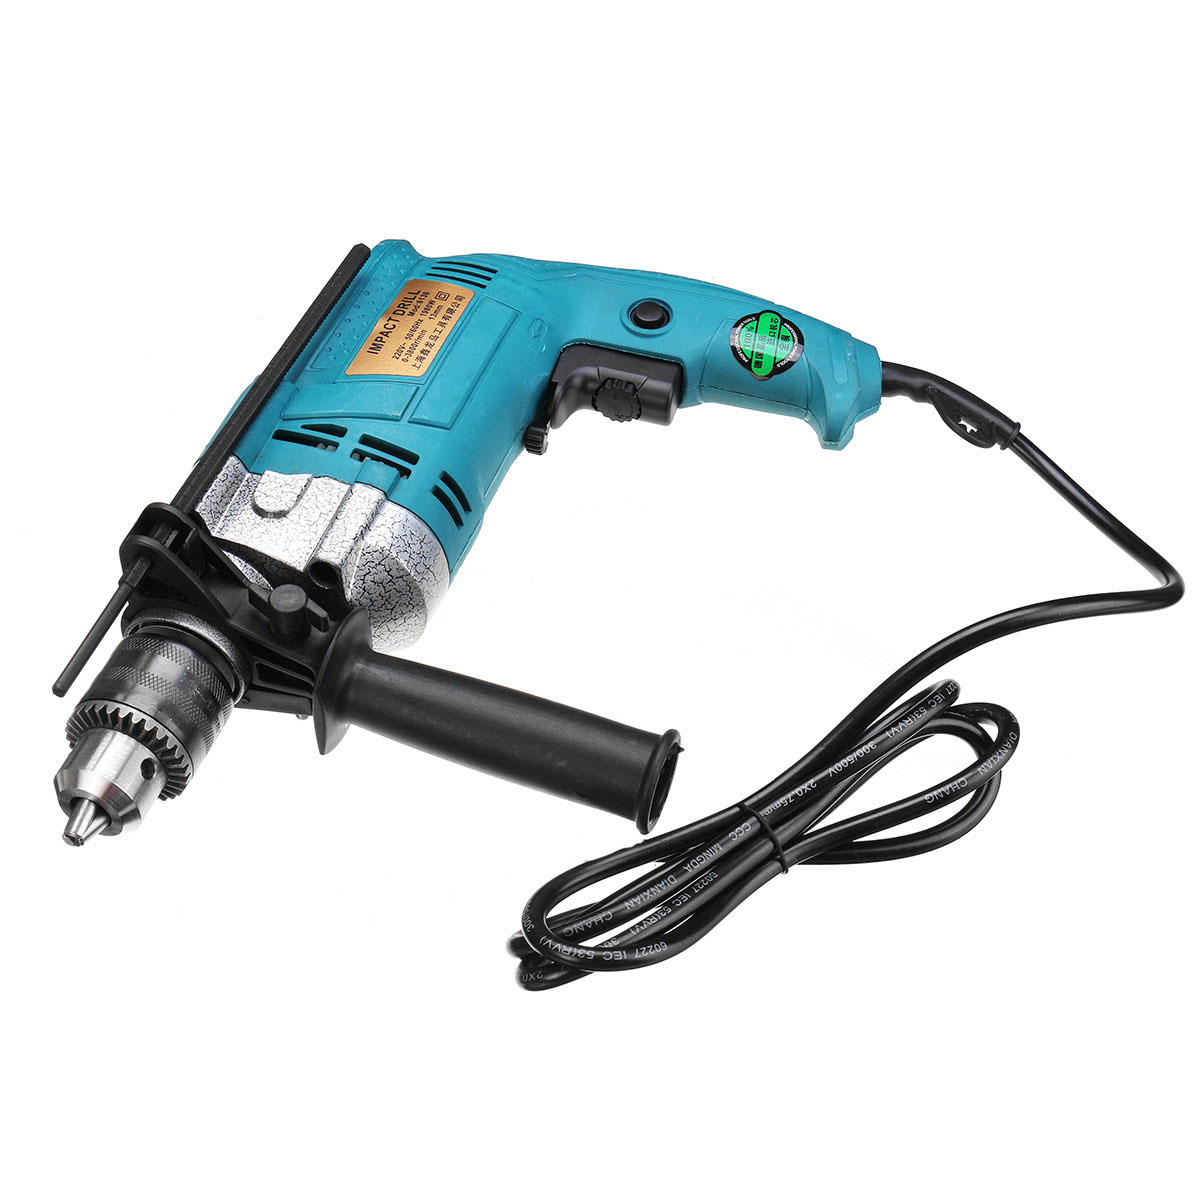 1980W-3800rpm-Electric-Impact-Drill-360deg-Rotary-Skid-Proof-Handle-With-Depth-Measuring-Scale-Spina-1715301-8